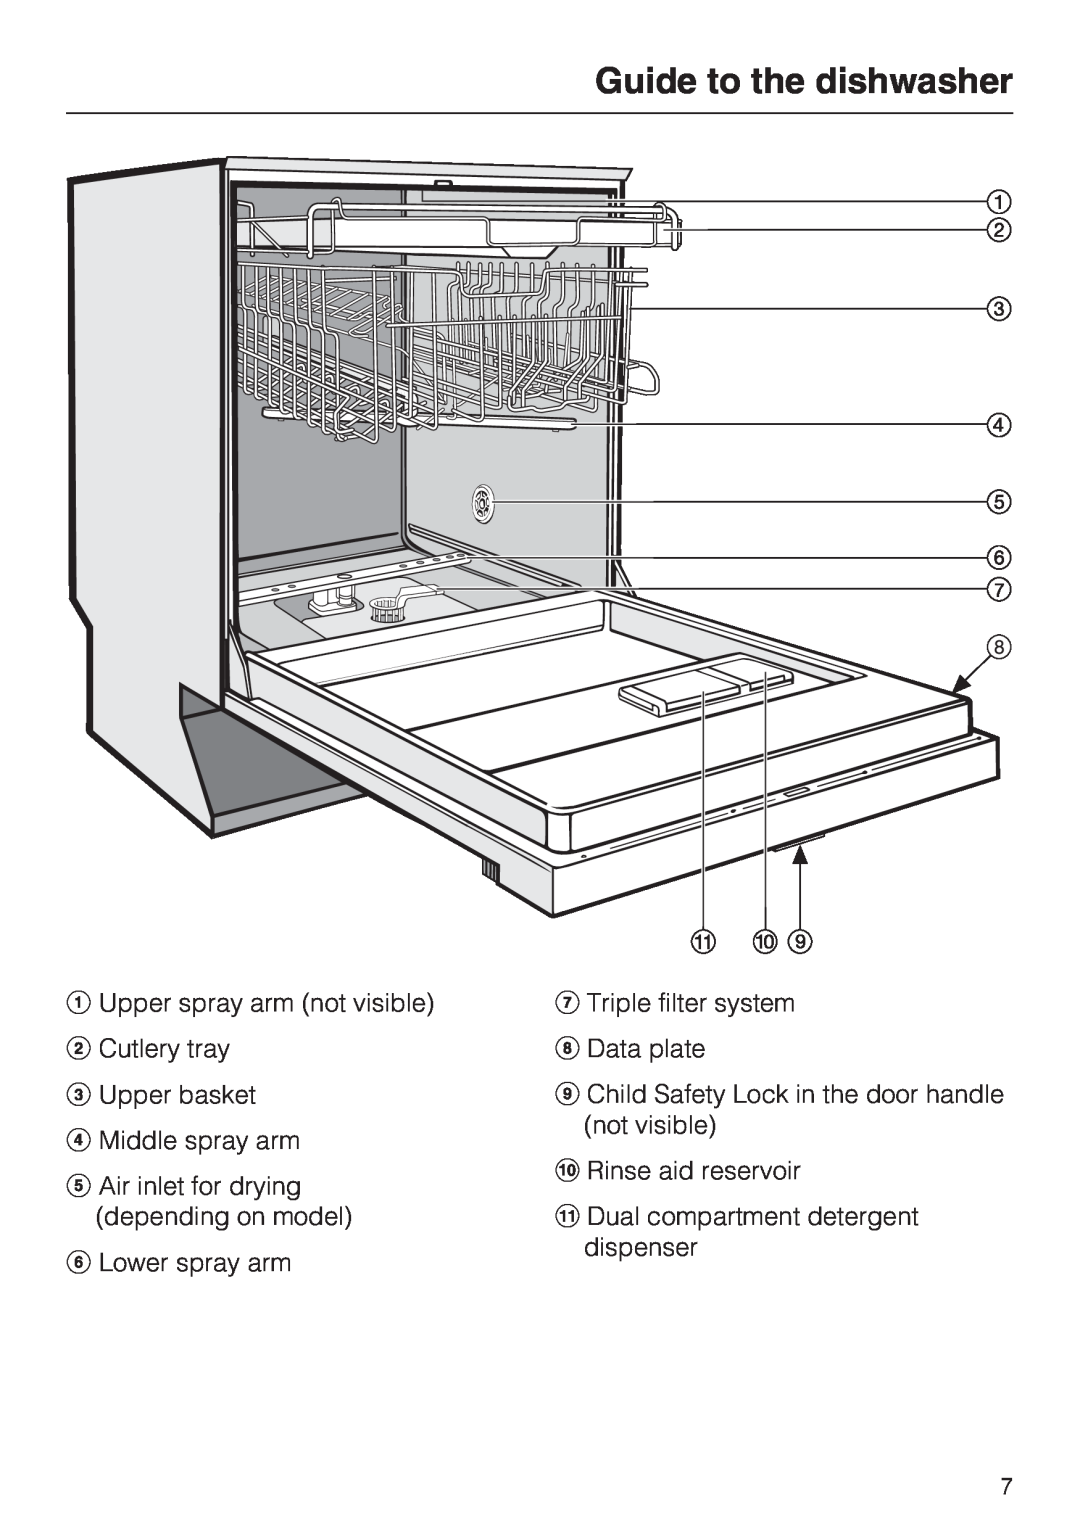 Miele G 4205 Guide to the dishwasher, Upper spray arm not visible Cutlery tray, Upper basket Middle spray arm 